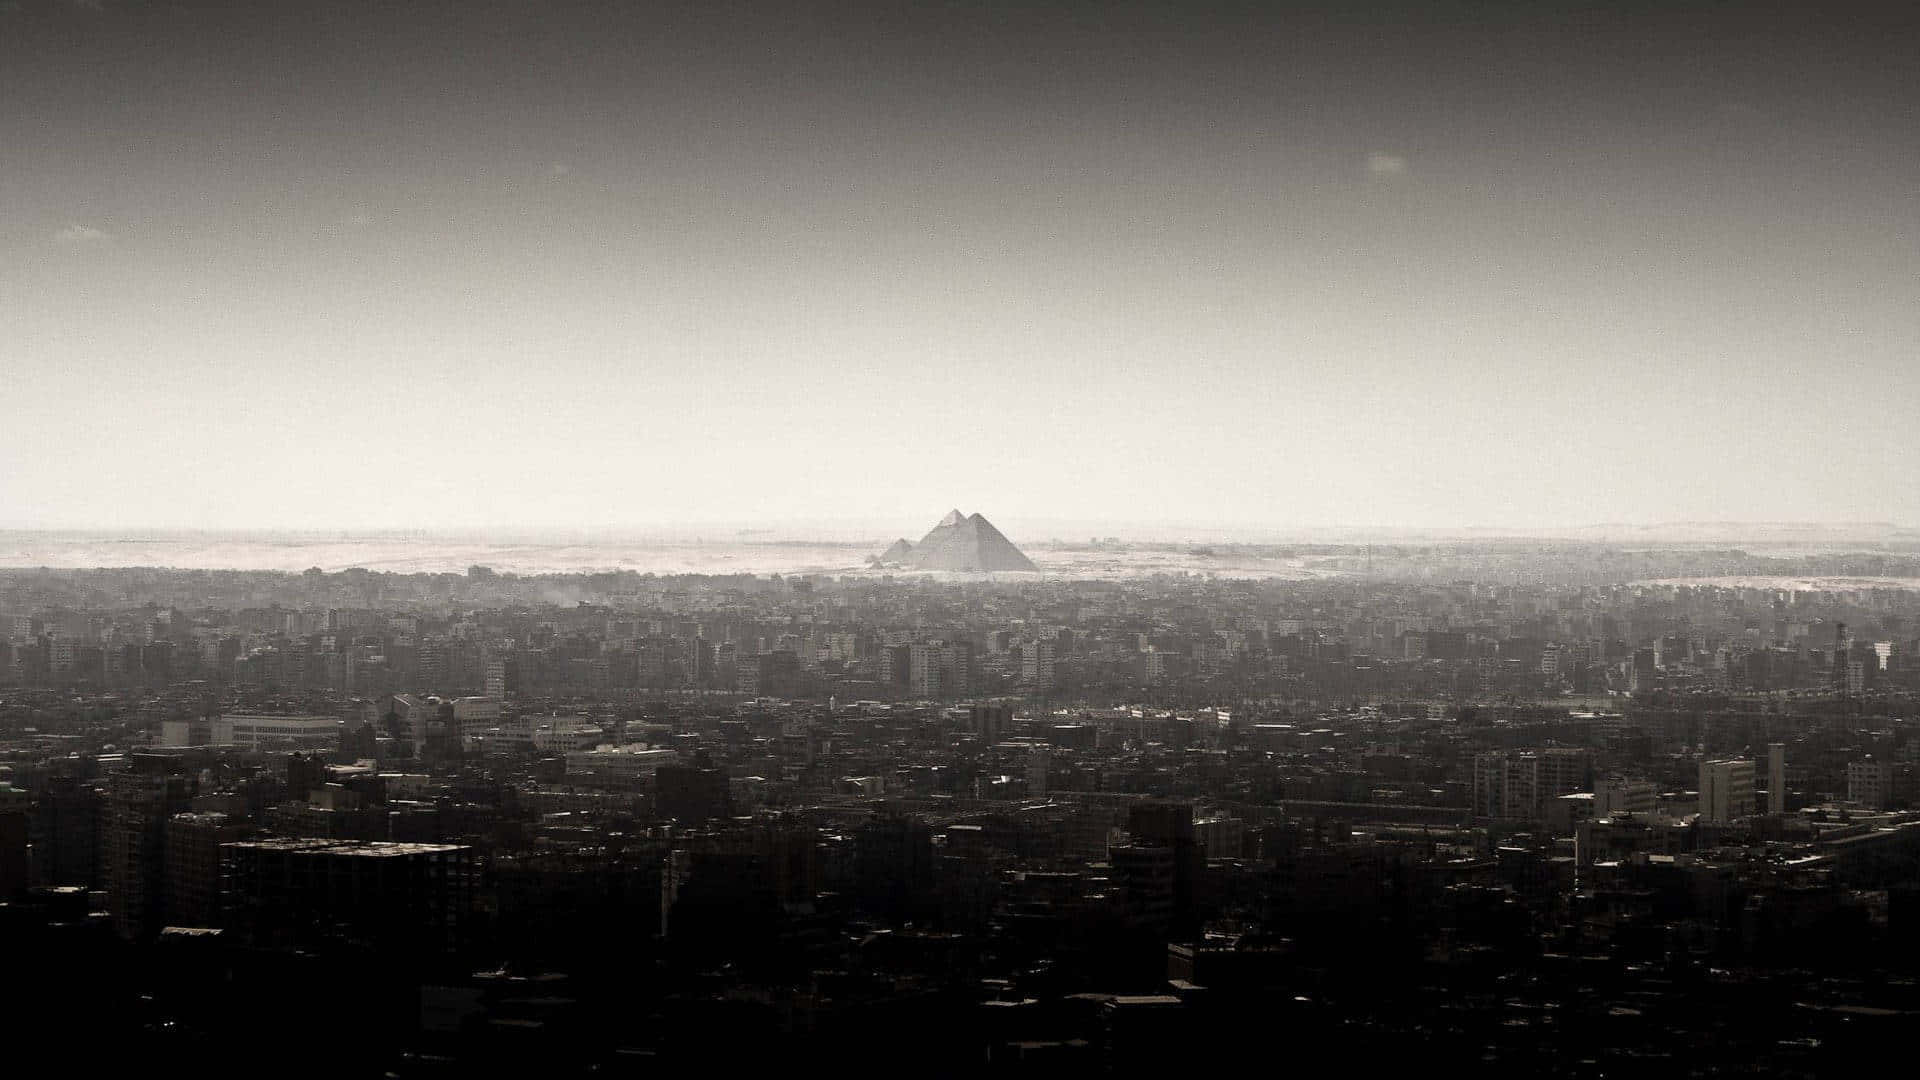 A Black And White Photo Of A City With A Mountain In The Background